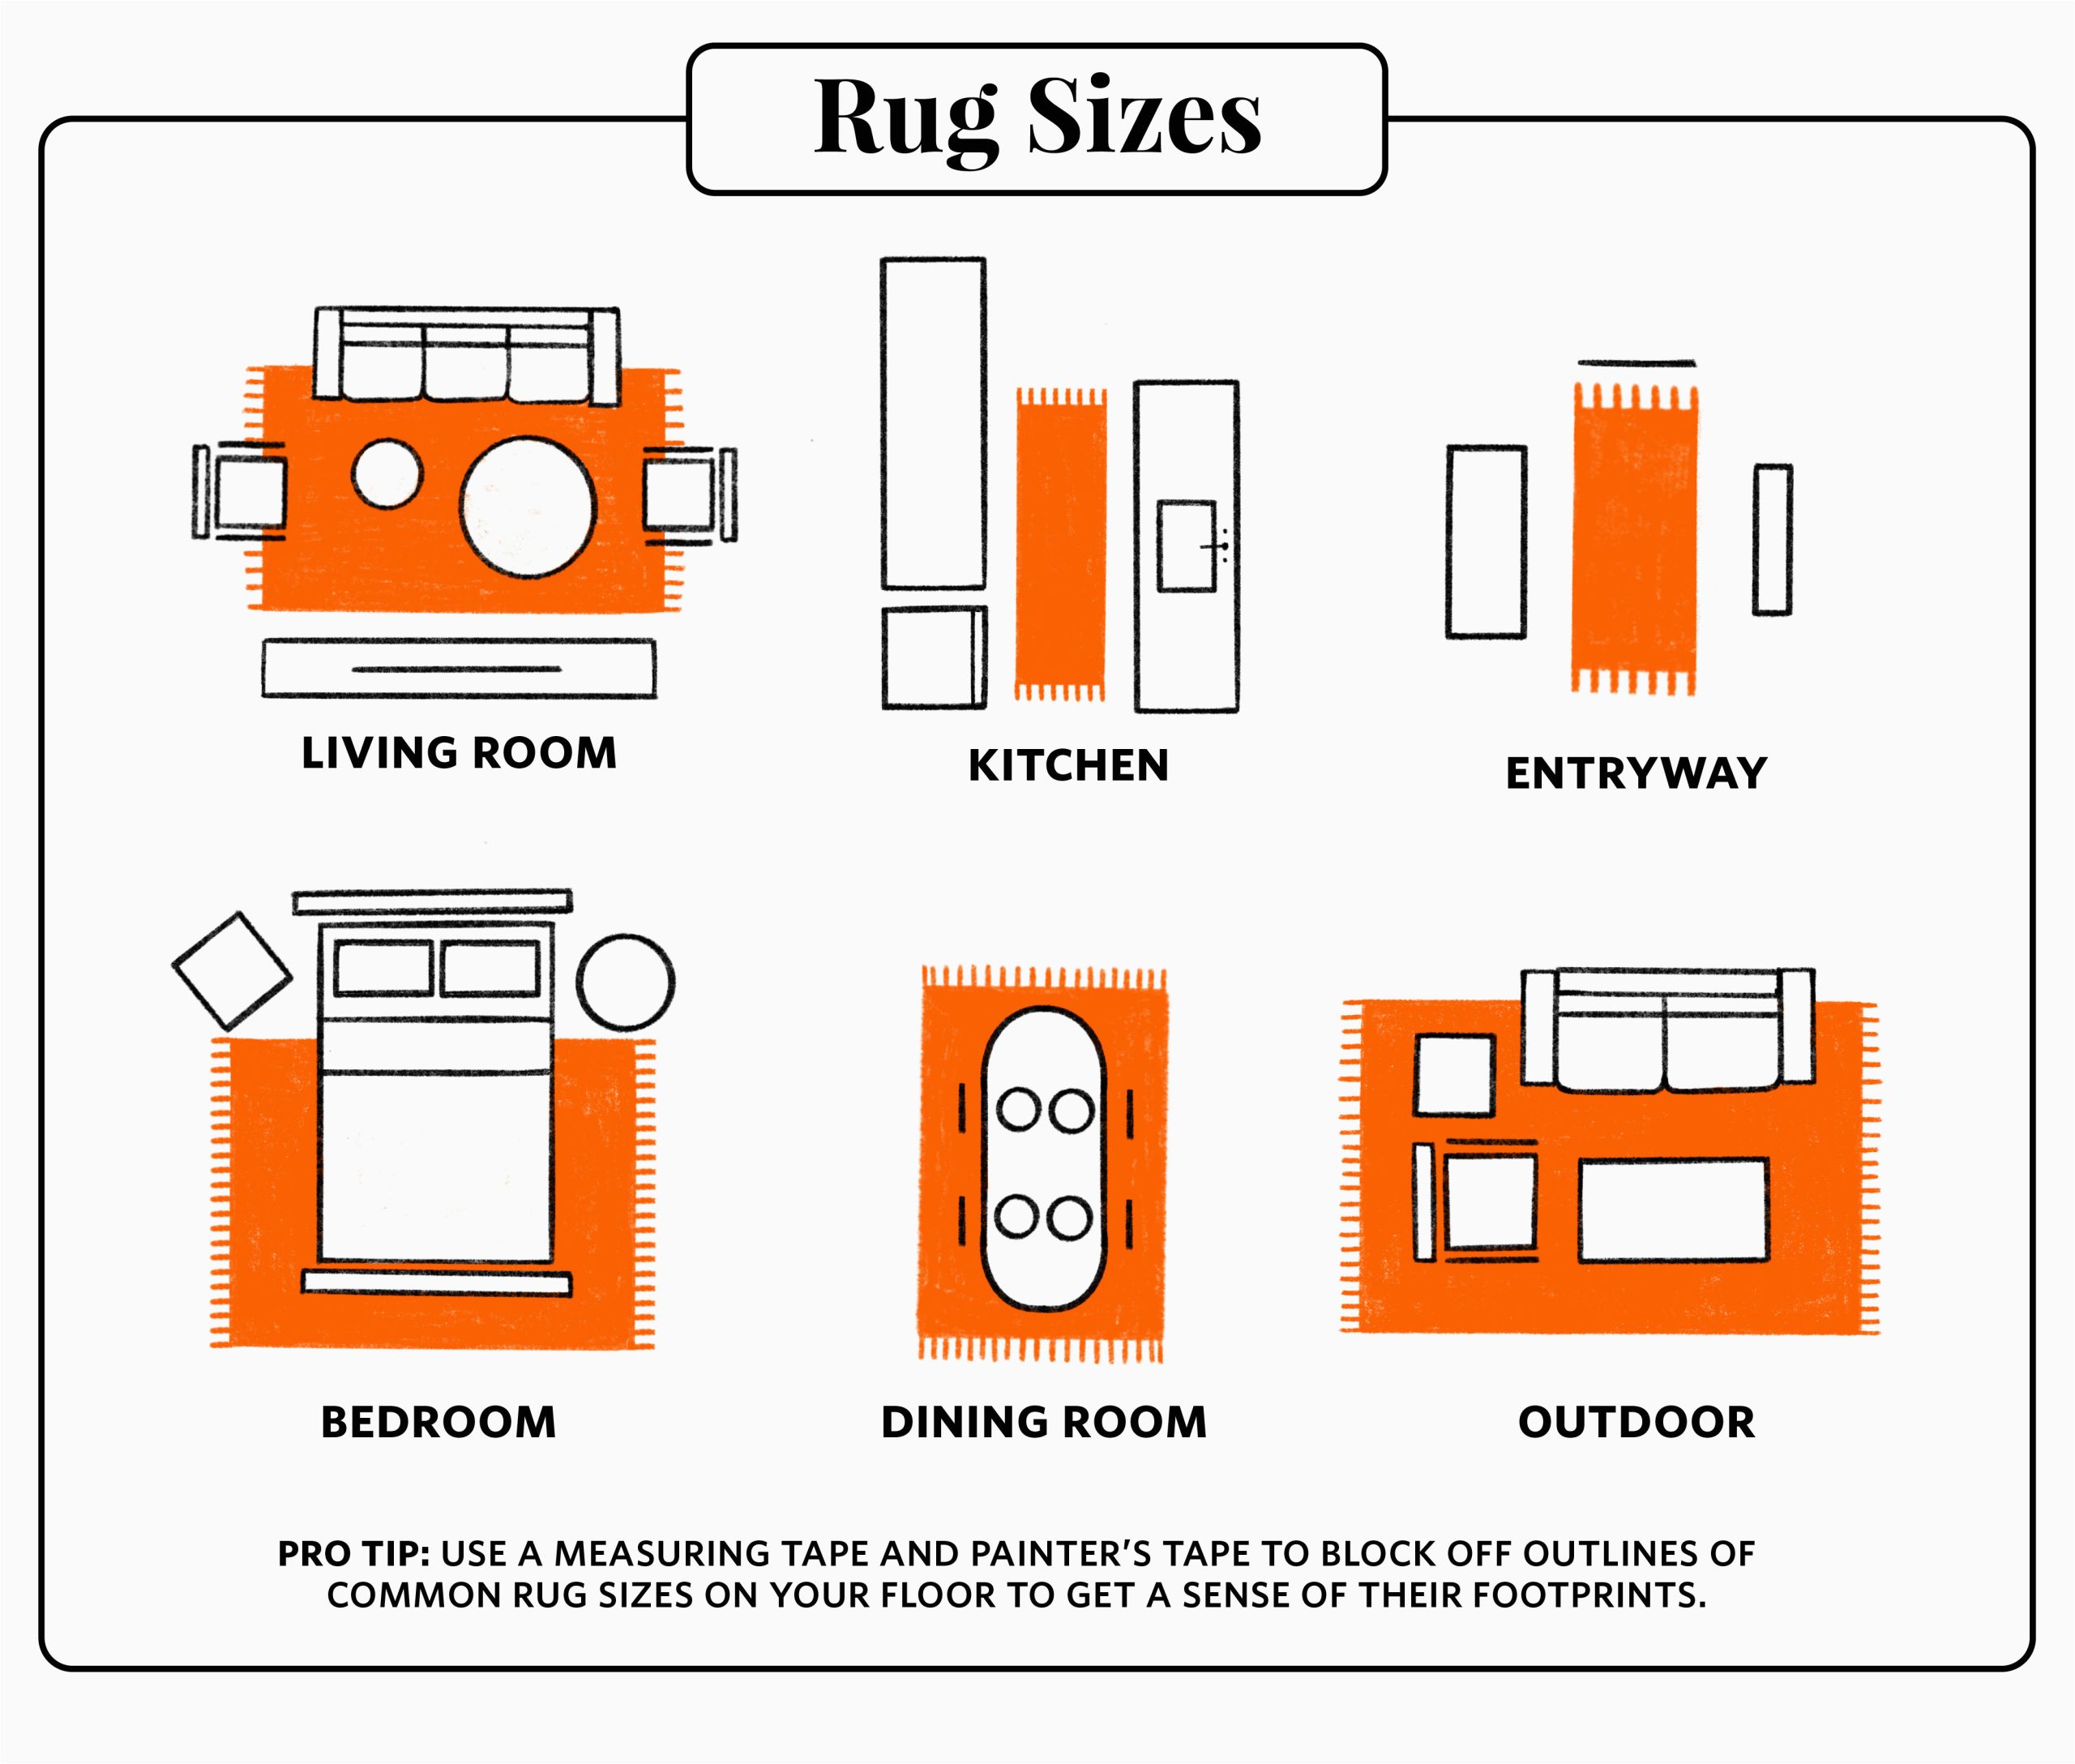 Shop area Rugs by Size How to Buy A Rug: Expert Guide to Rug Sizes, Styles, Shapes …